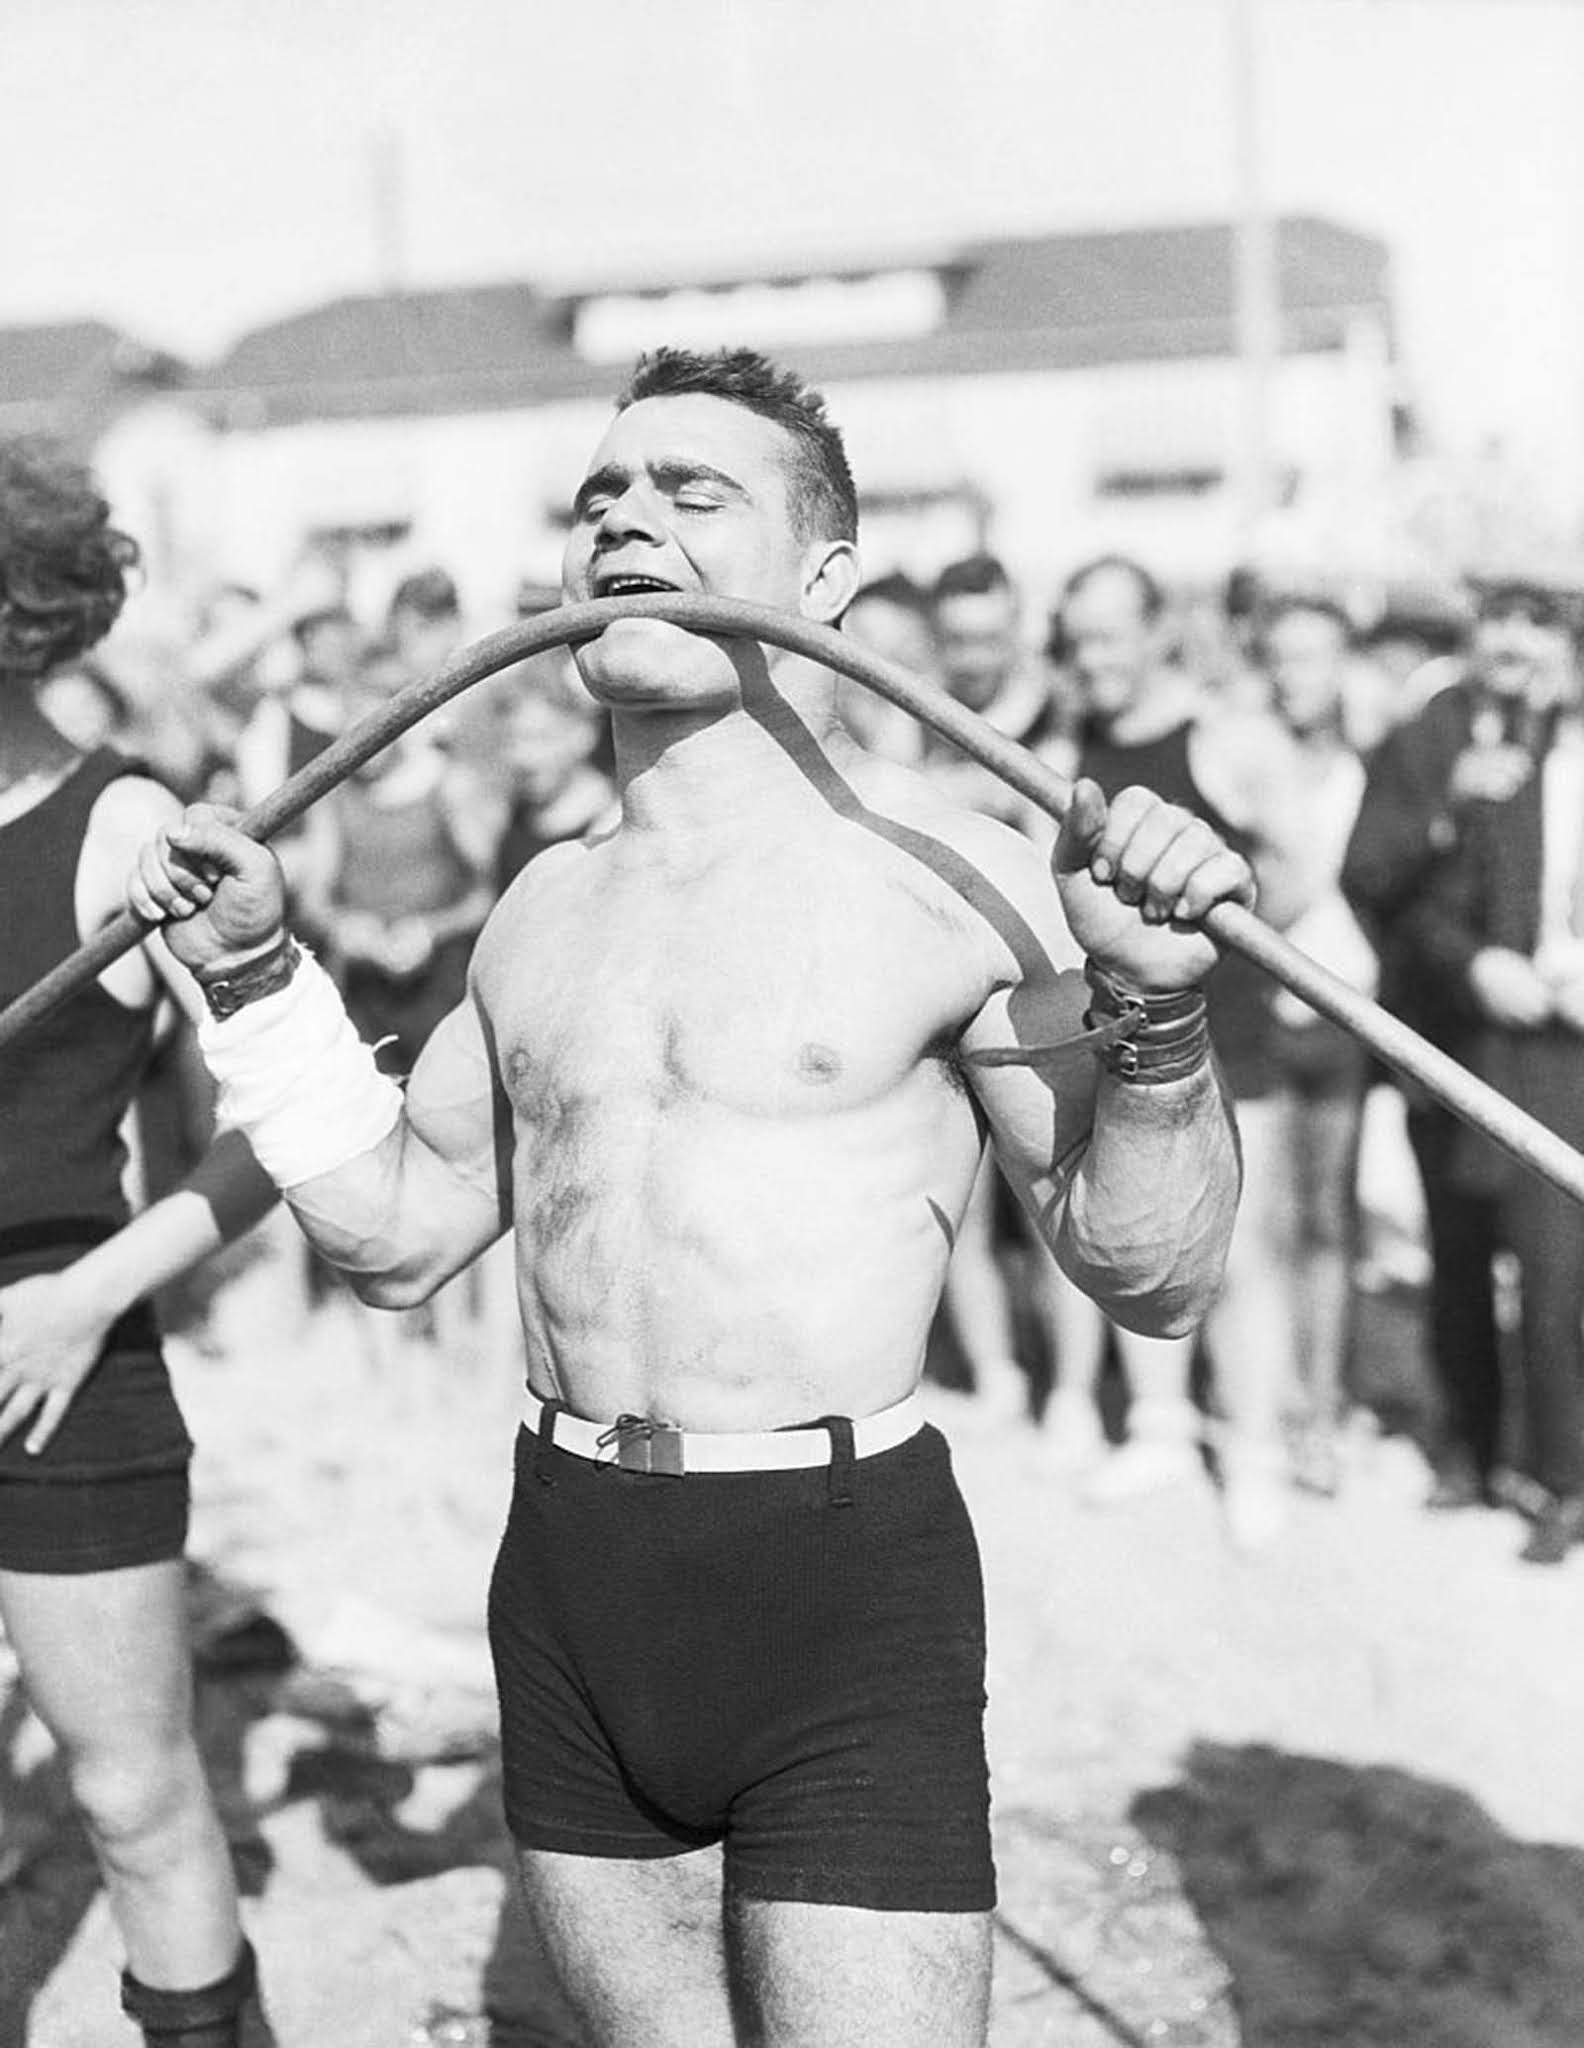 Strongman Gus Lasser bends an iron pipe with his mouth, 1920s.